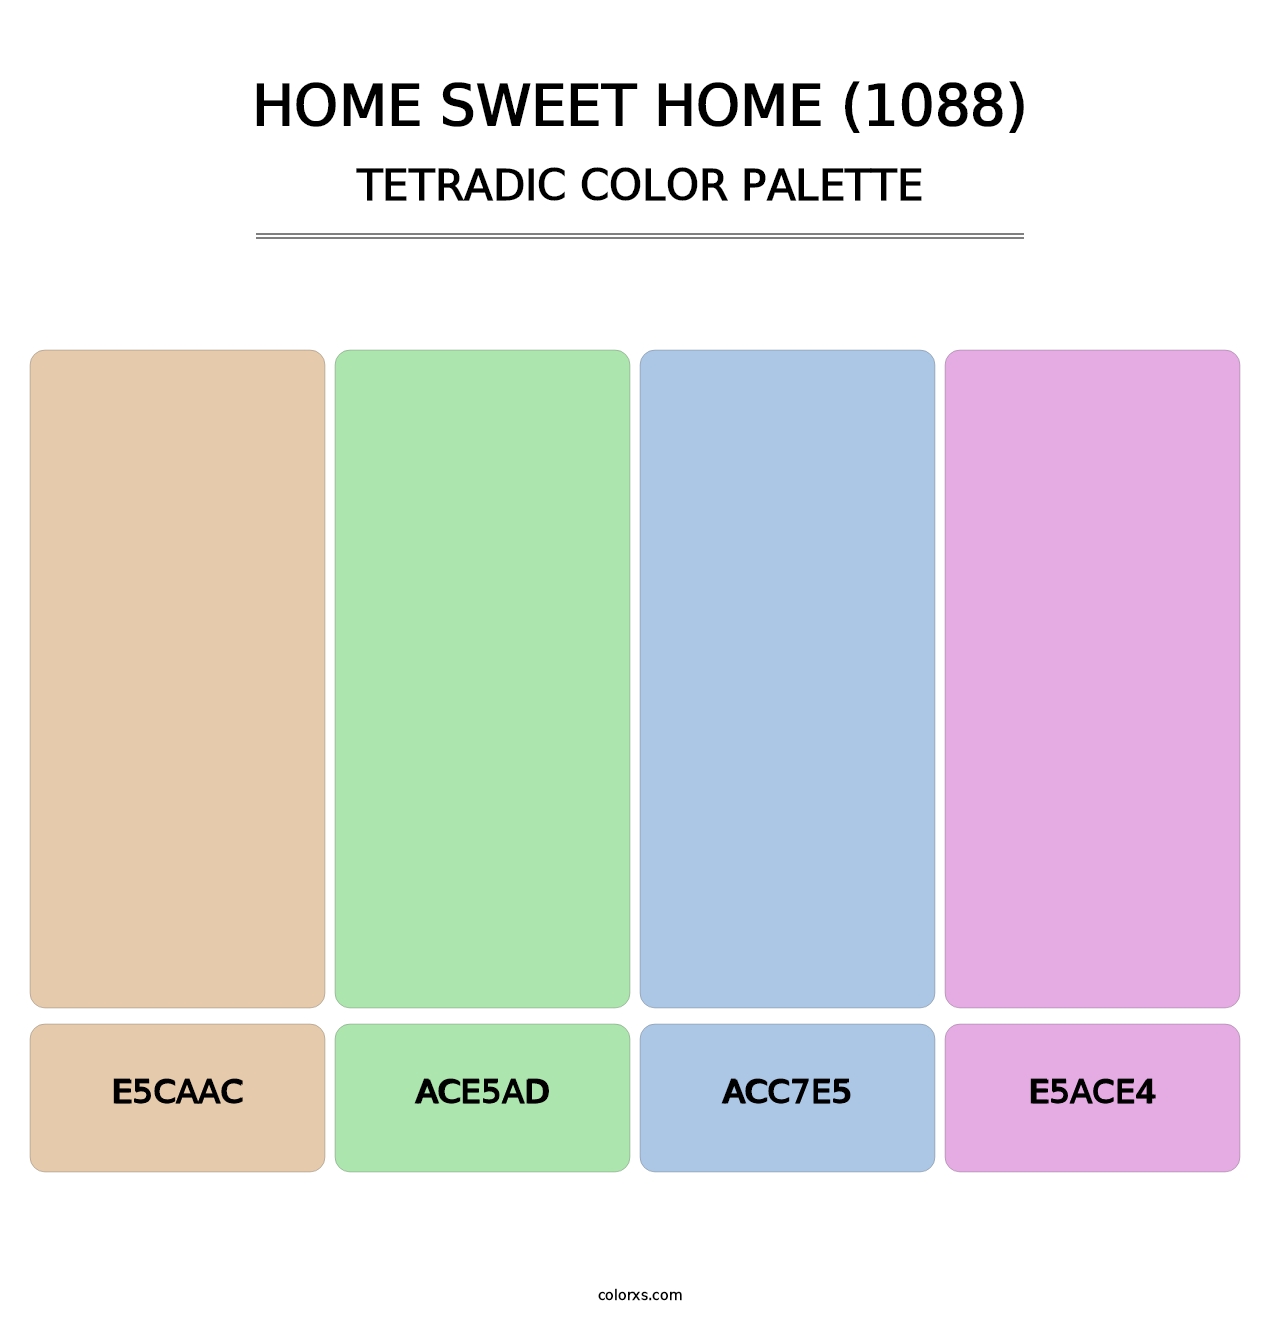 Home Sweet Home (1088) - Tetradic Color Palette